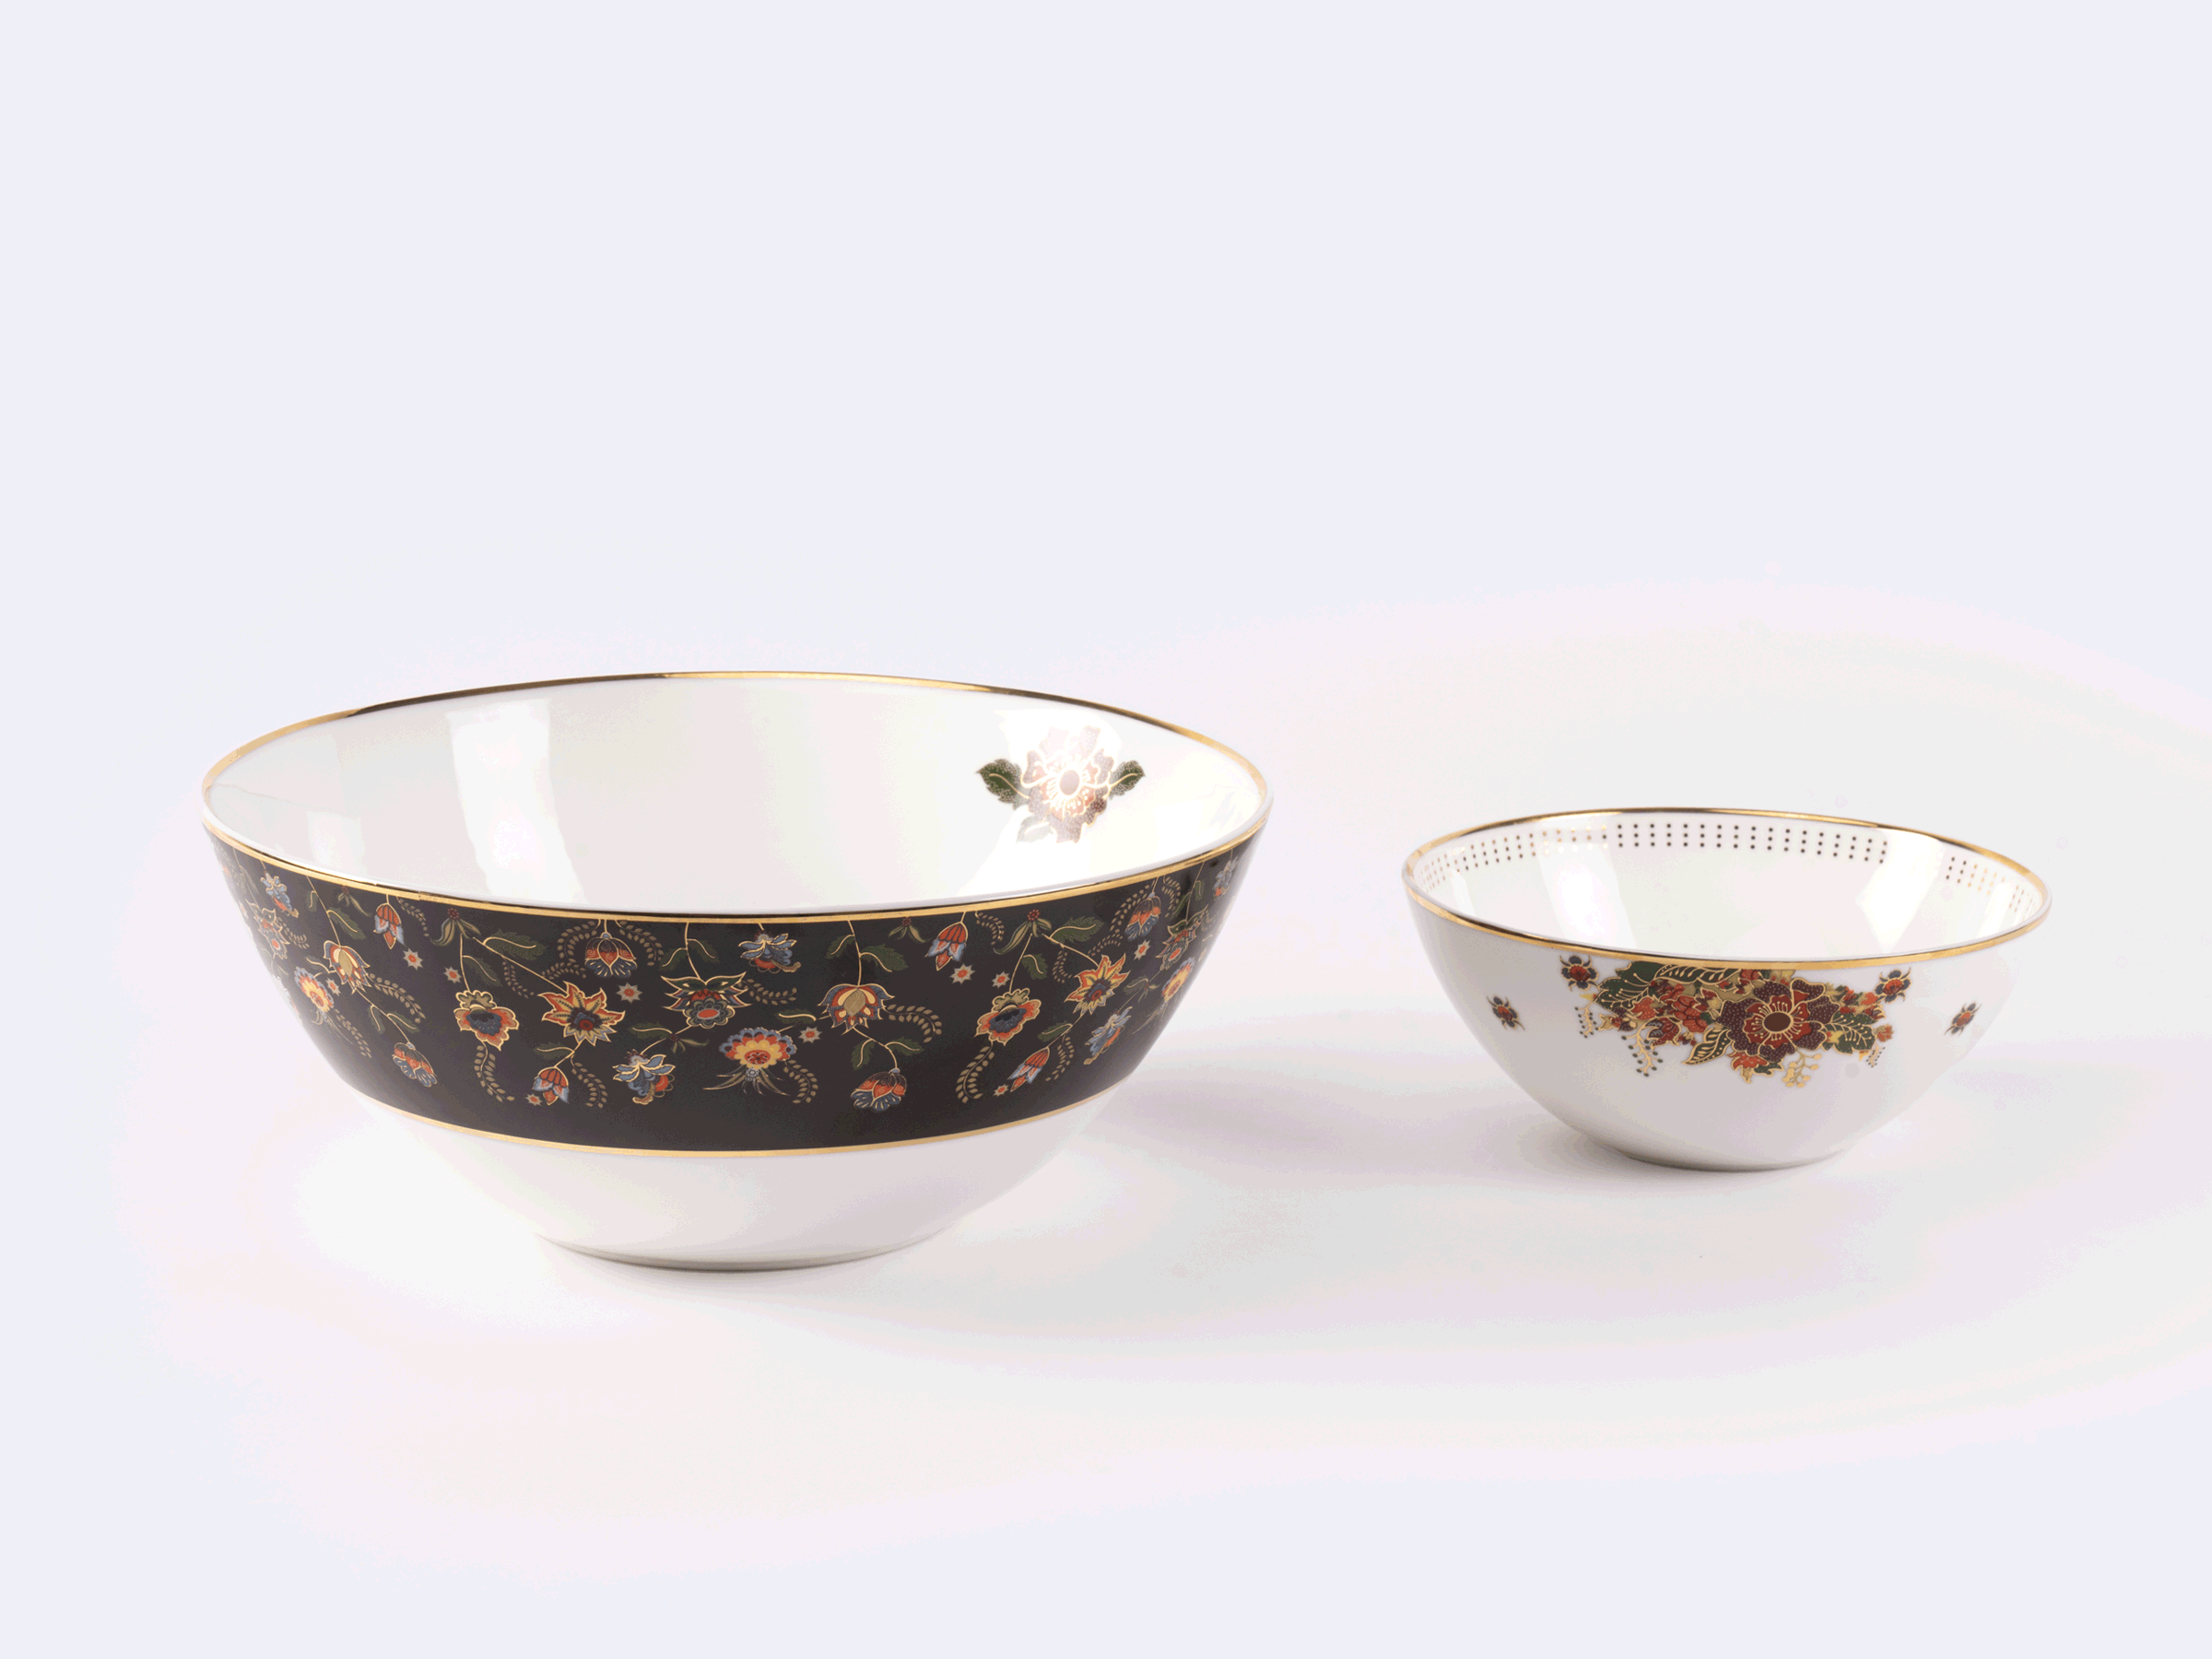 Serving Bowls Small & Large